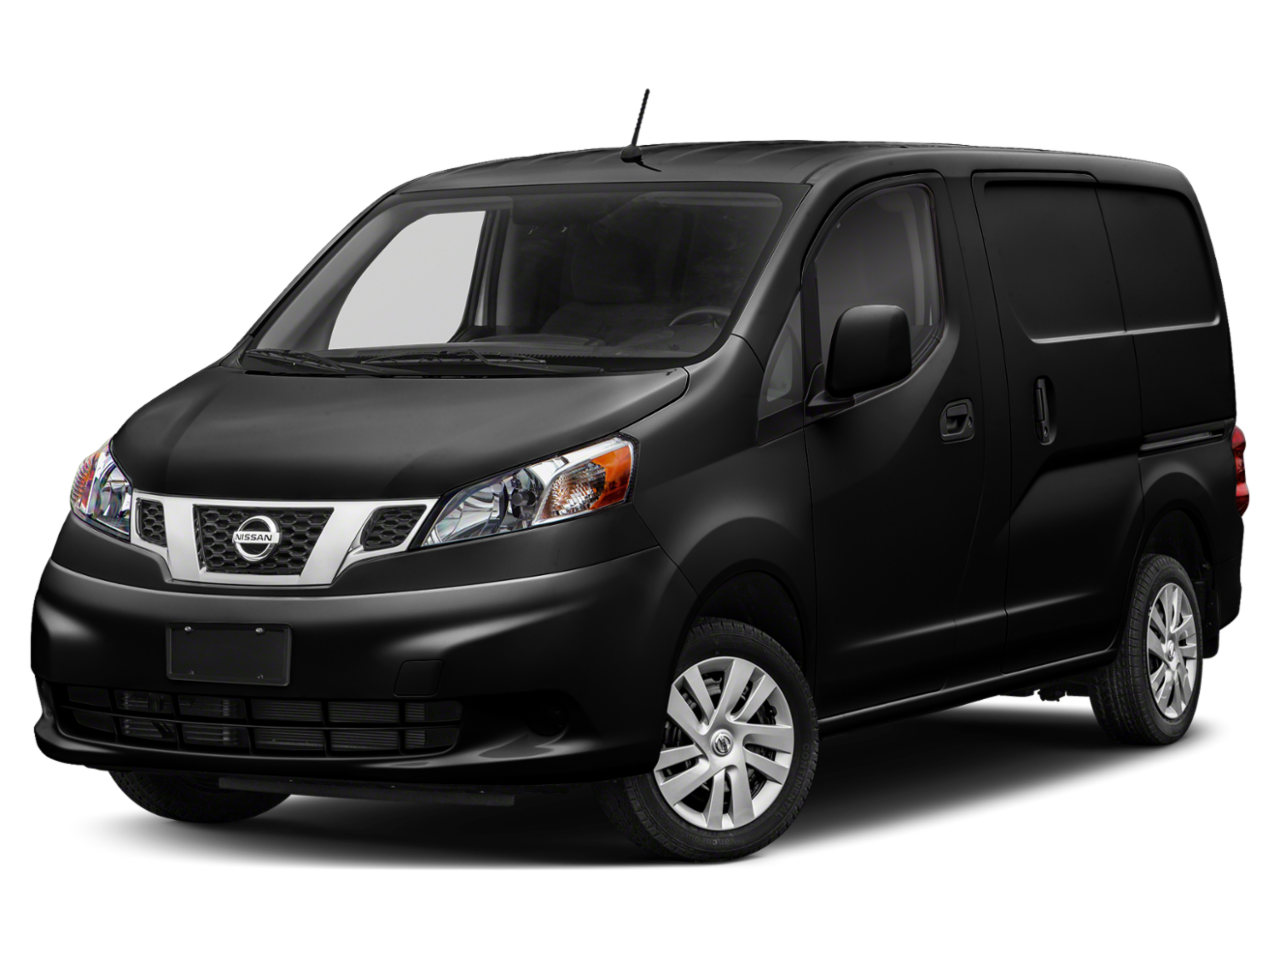 2019 Nissan NV200 Repair: Service and Maintenance Cost